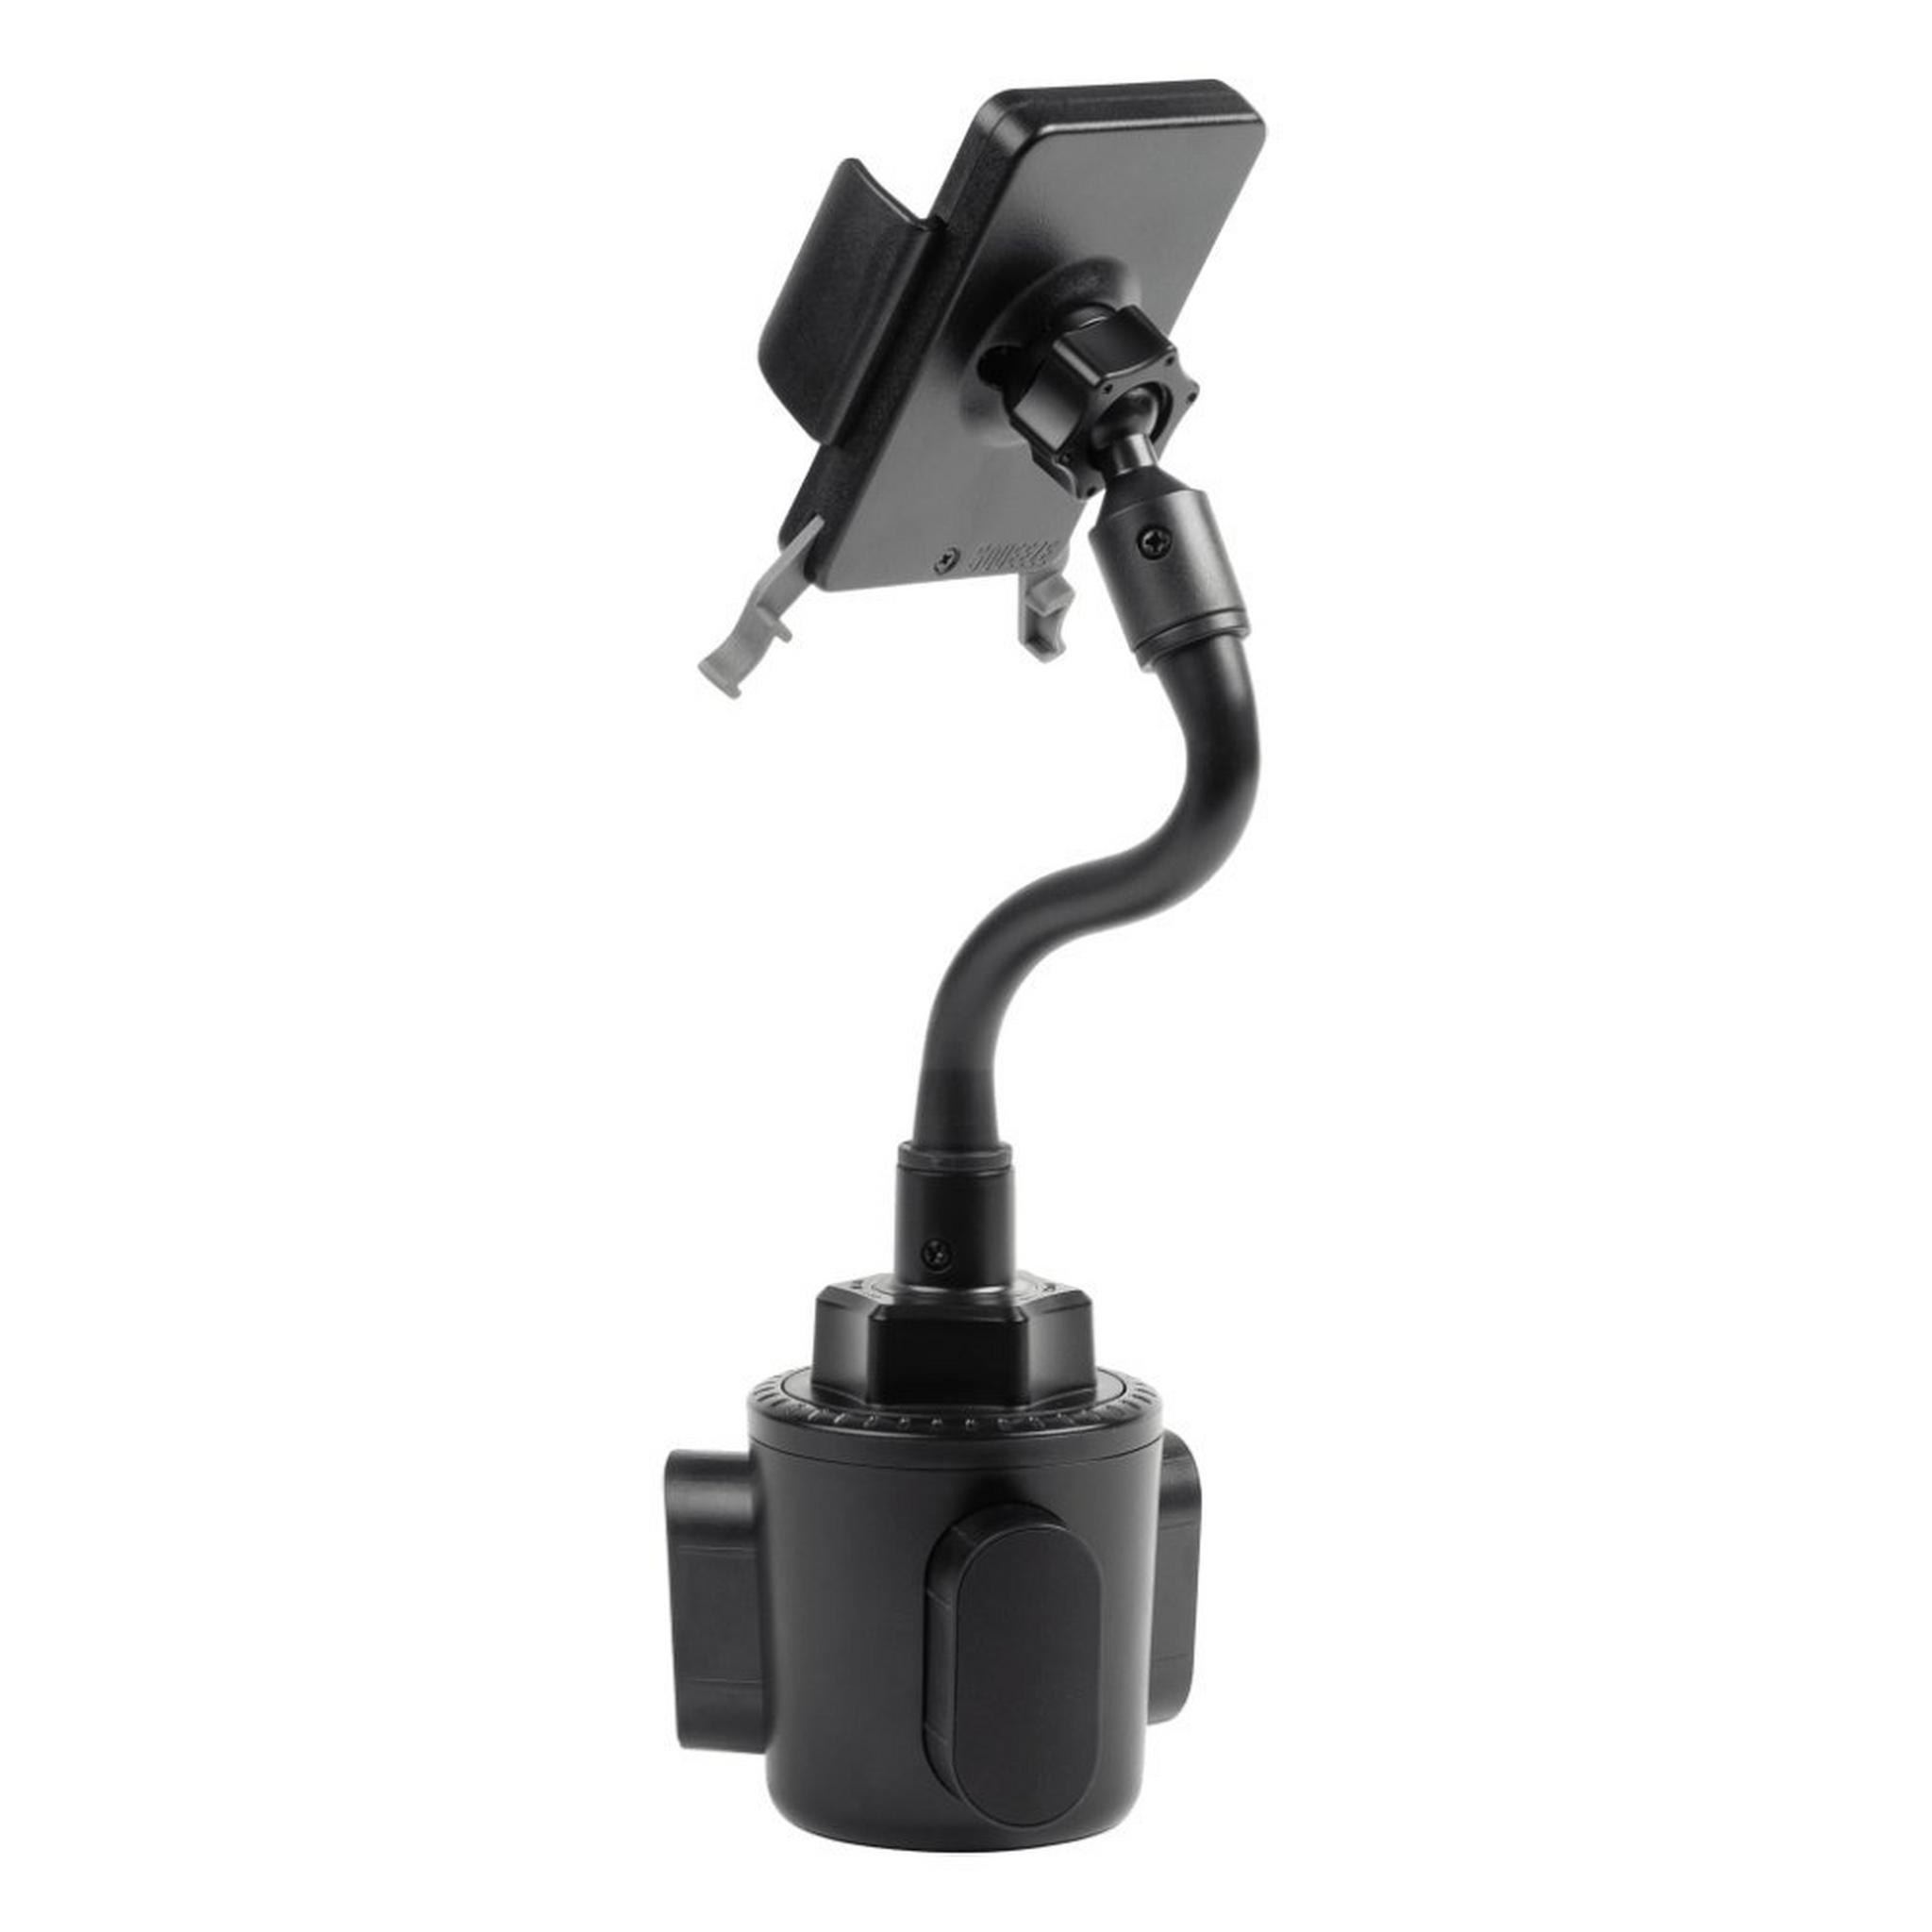 Niteize Squeeze Universal Cup Holder Mount